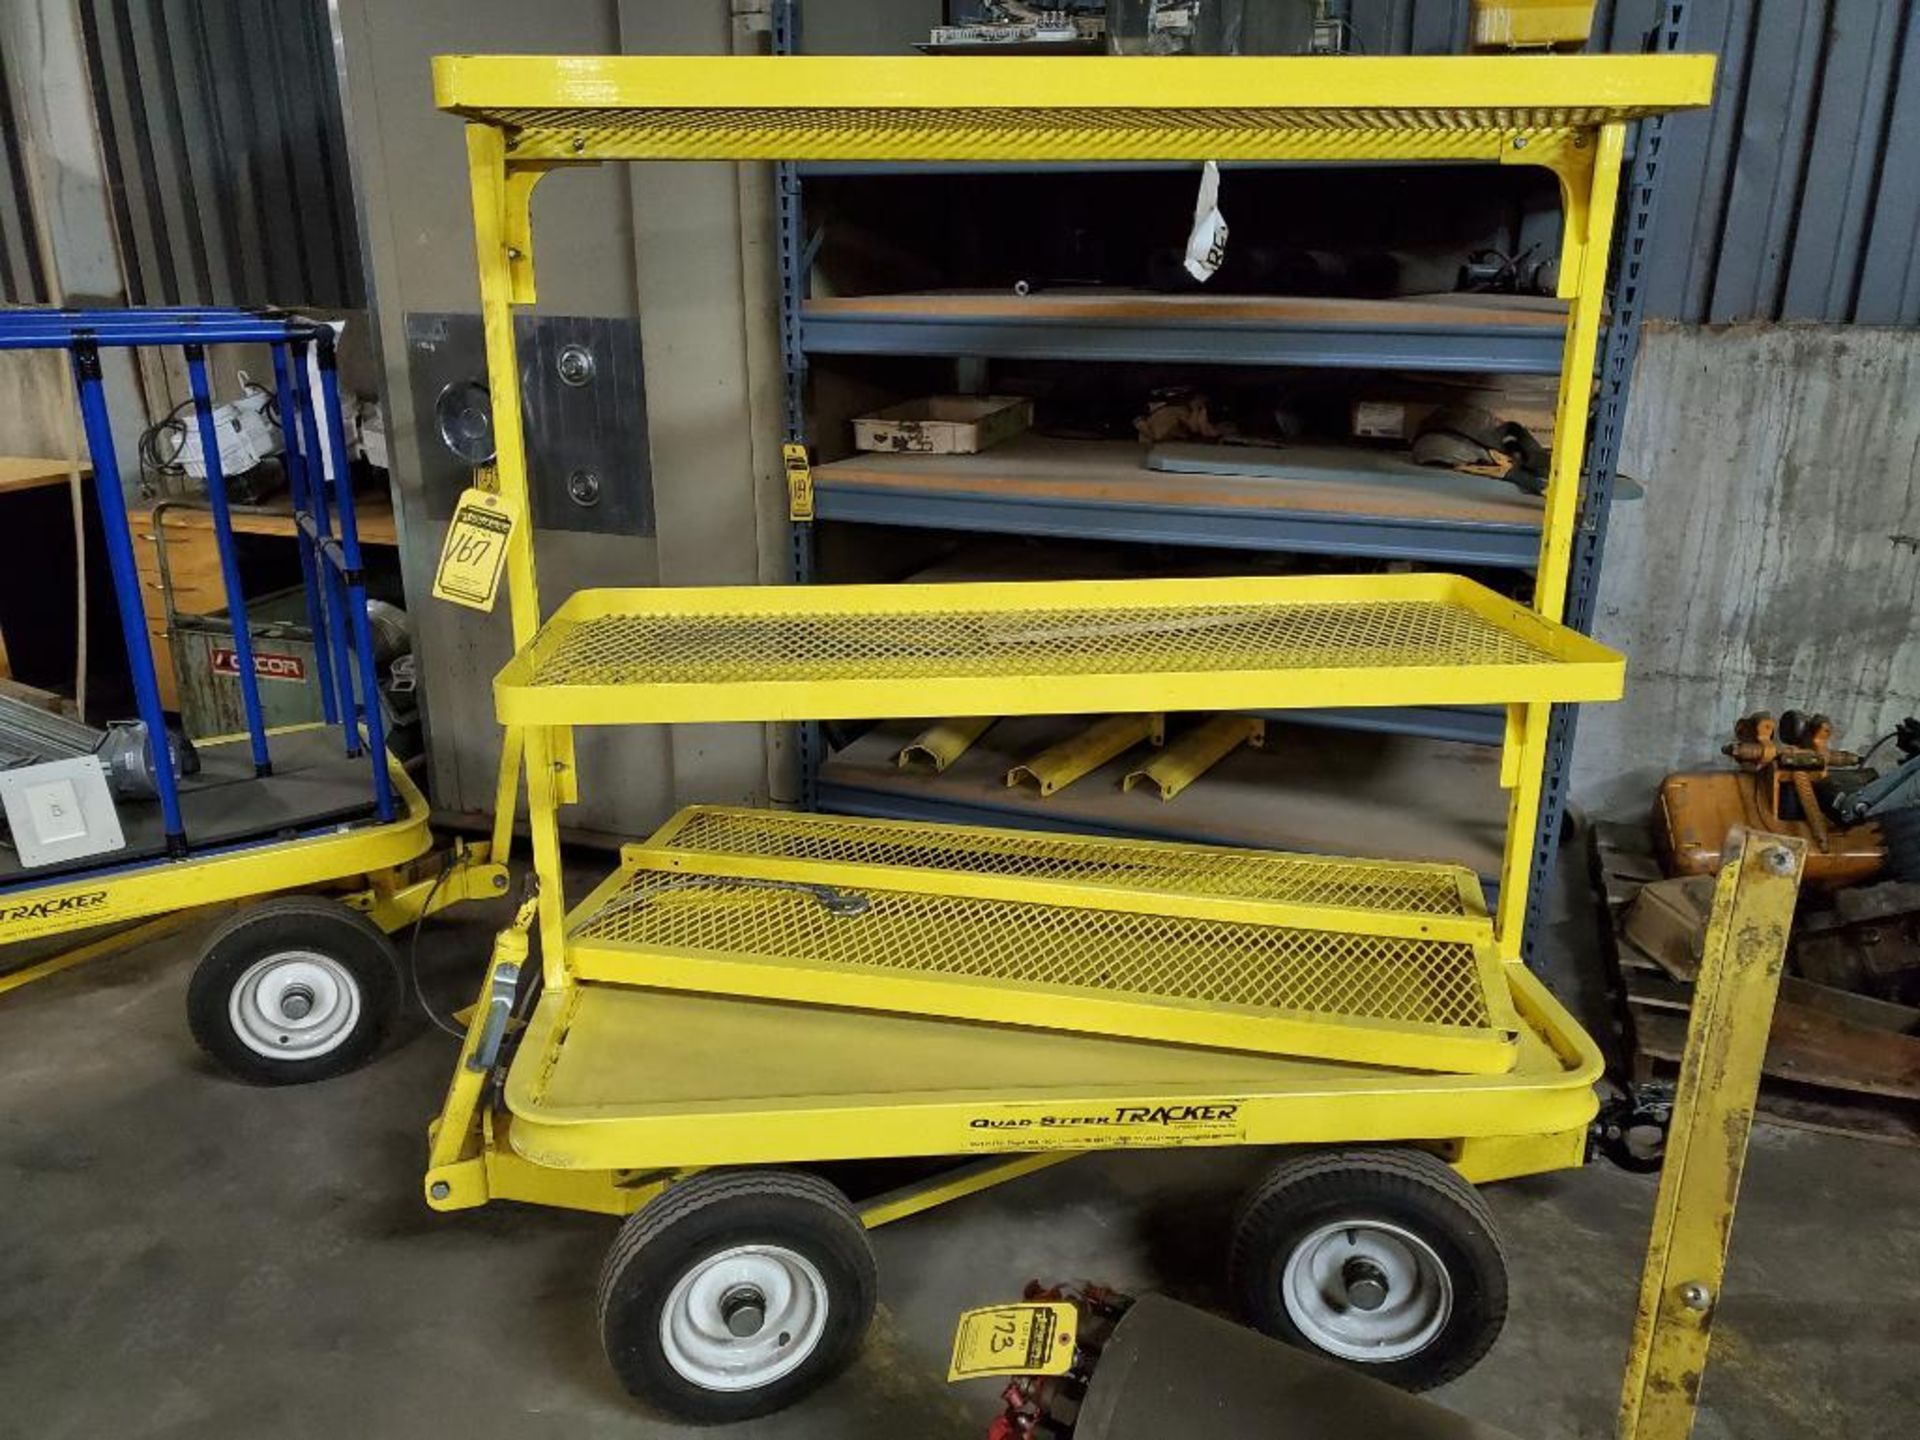 (2) Quad-Steer Tracker Towable Carts w/ Pneumatic Tires - Image 2 of 7